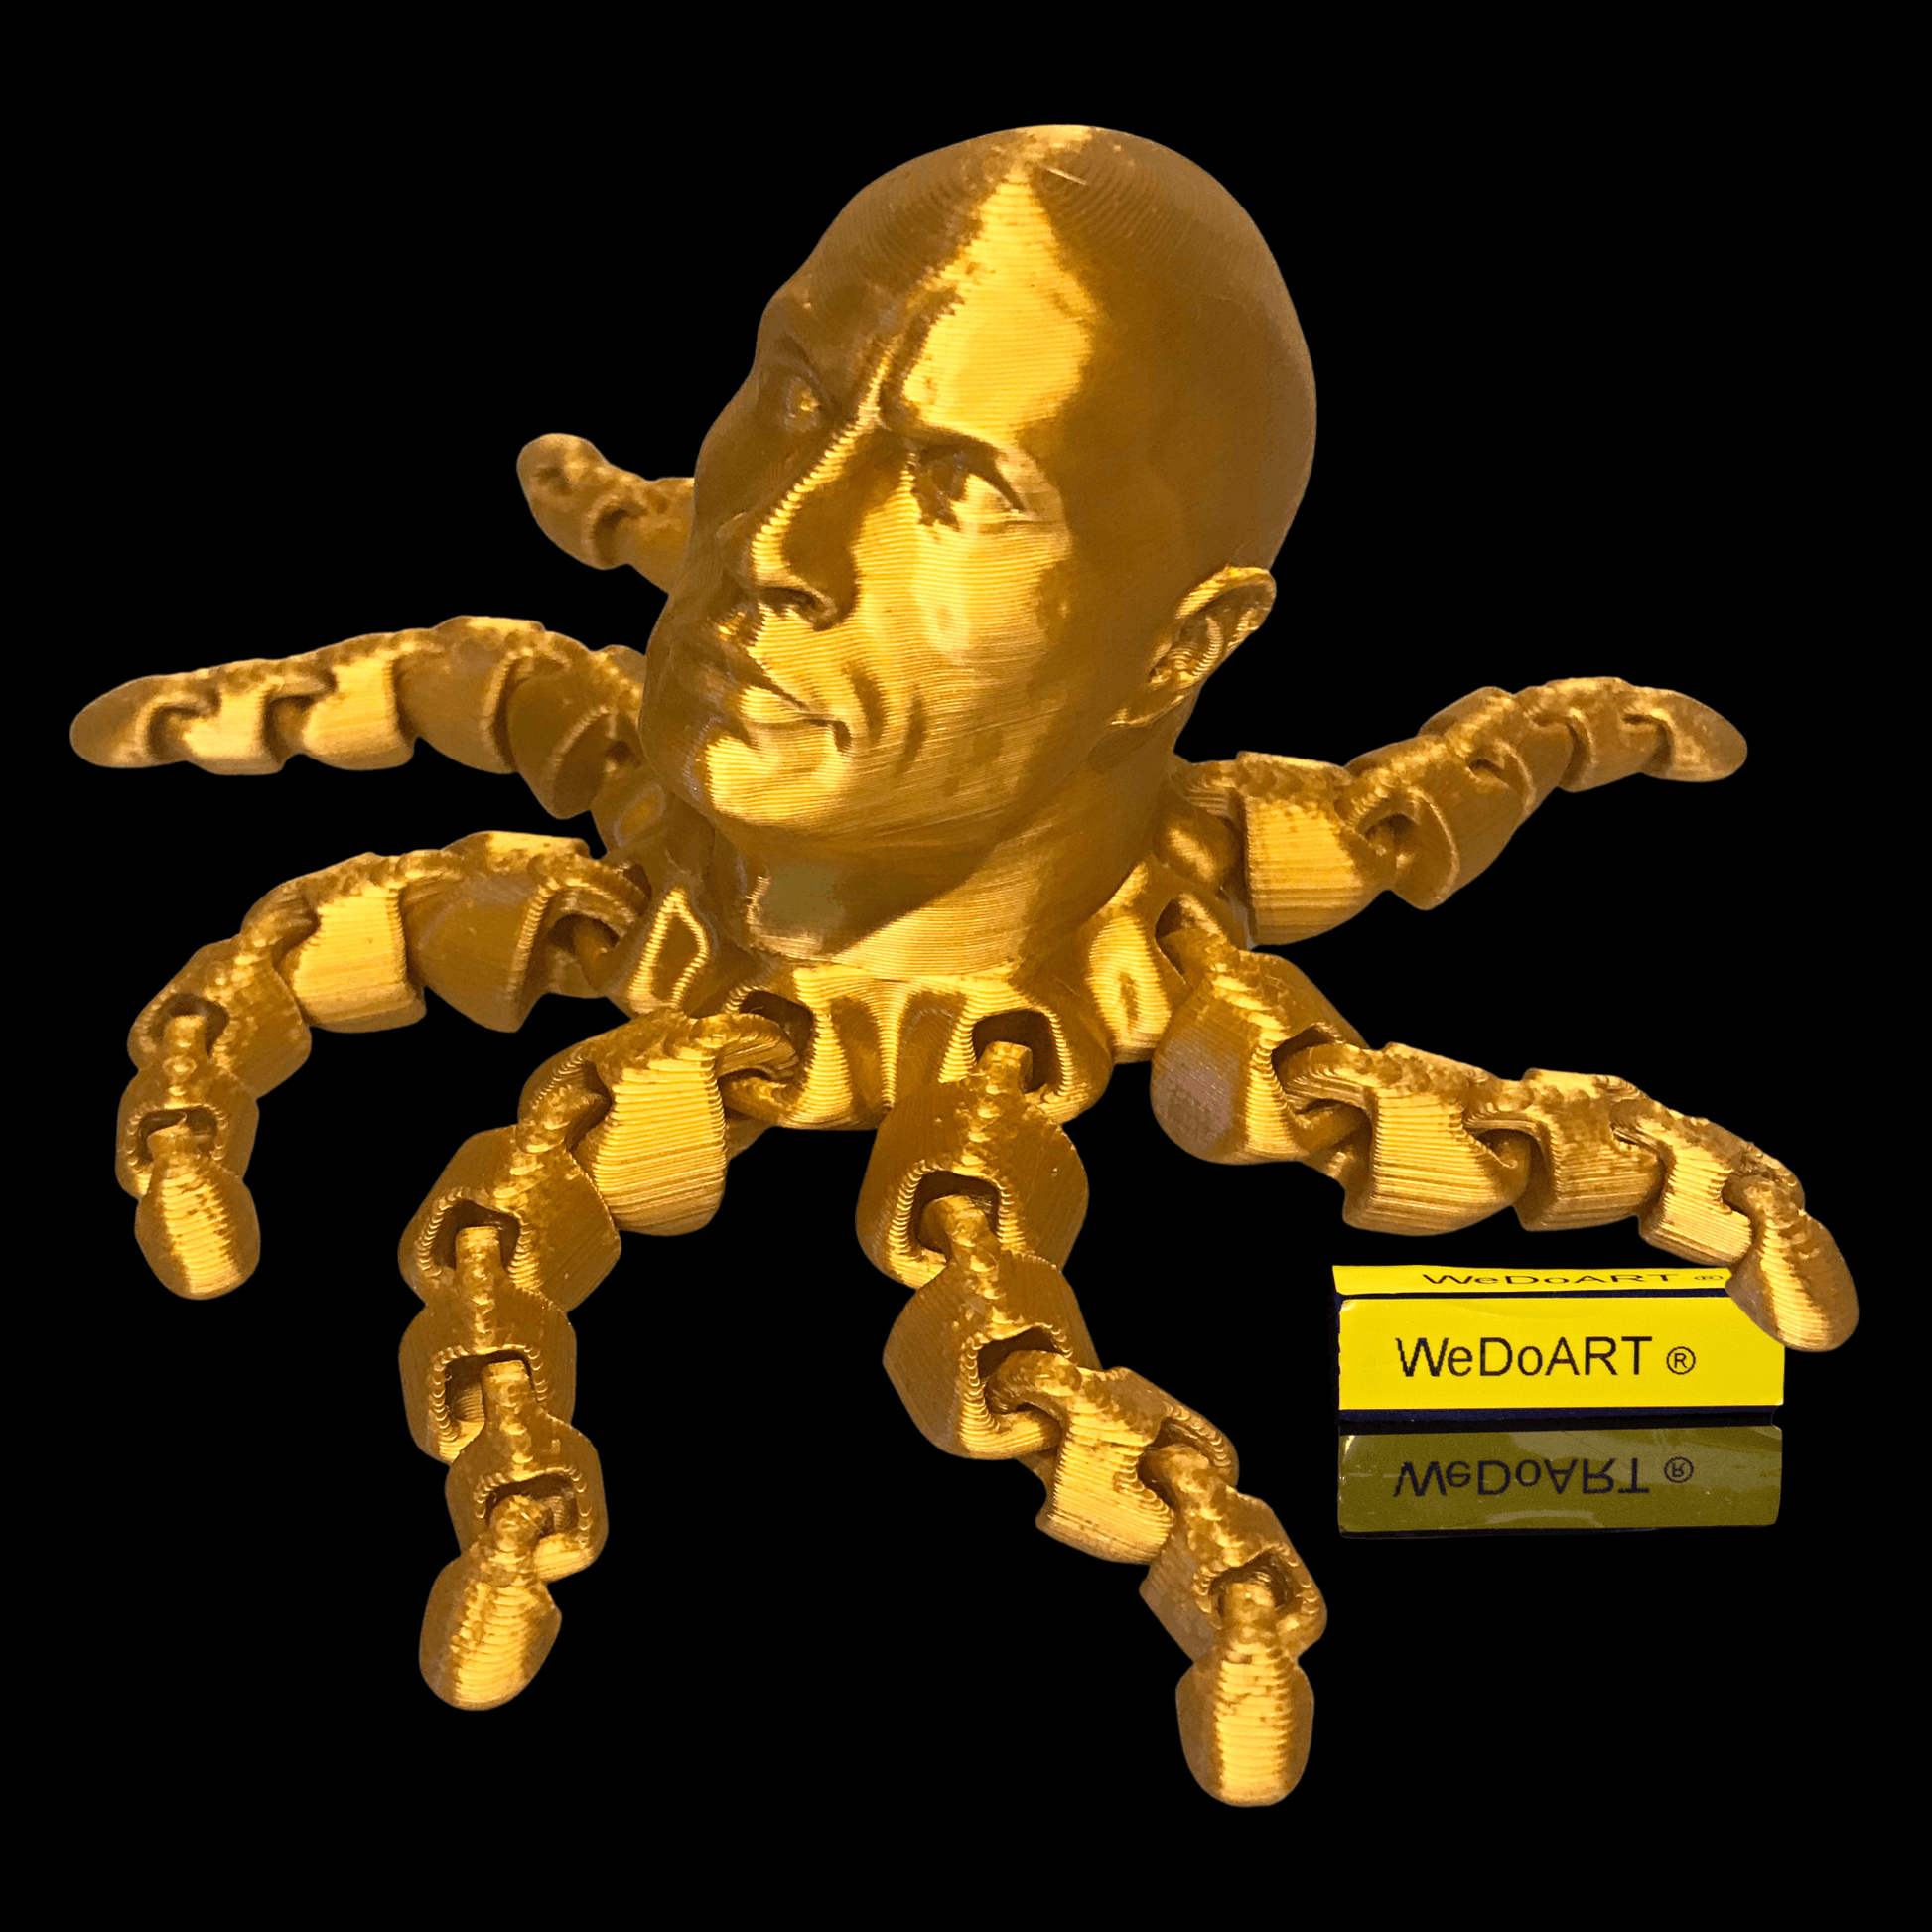 The Rocktopus - 3D Printed Octopus With The Rocks Head 12.8 cm 5" - WEDOART-IL